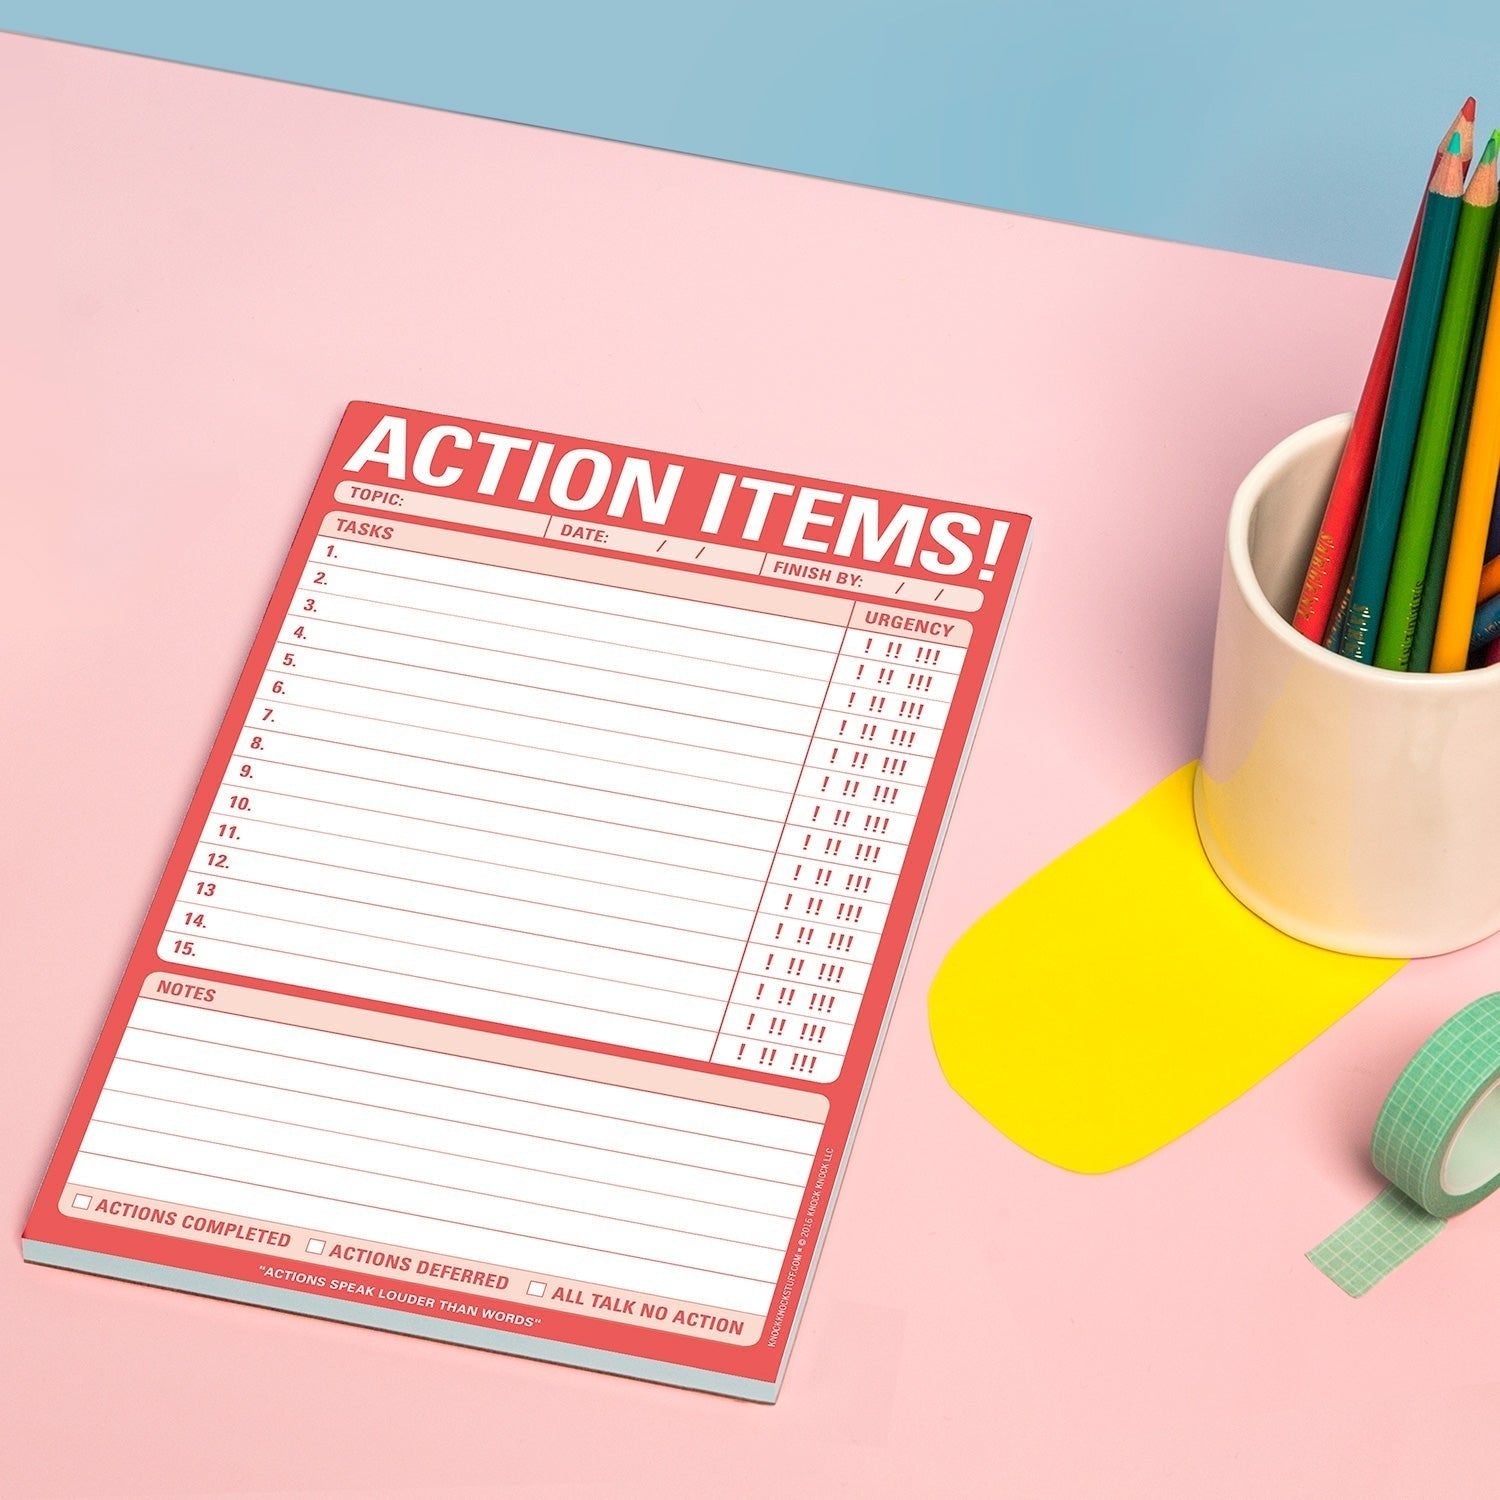 Action Items! Task List Planner Pad in Red